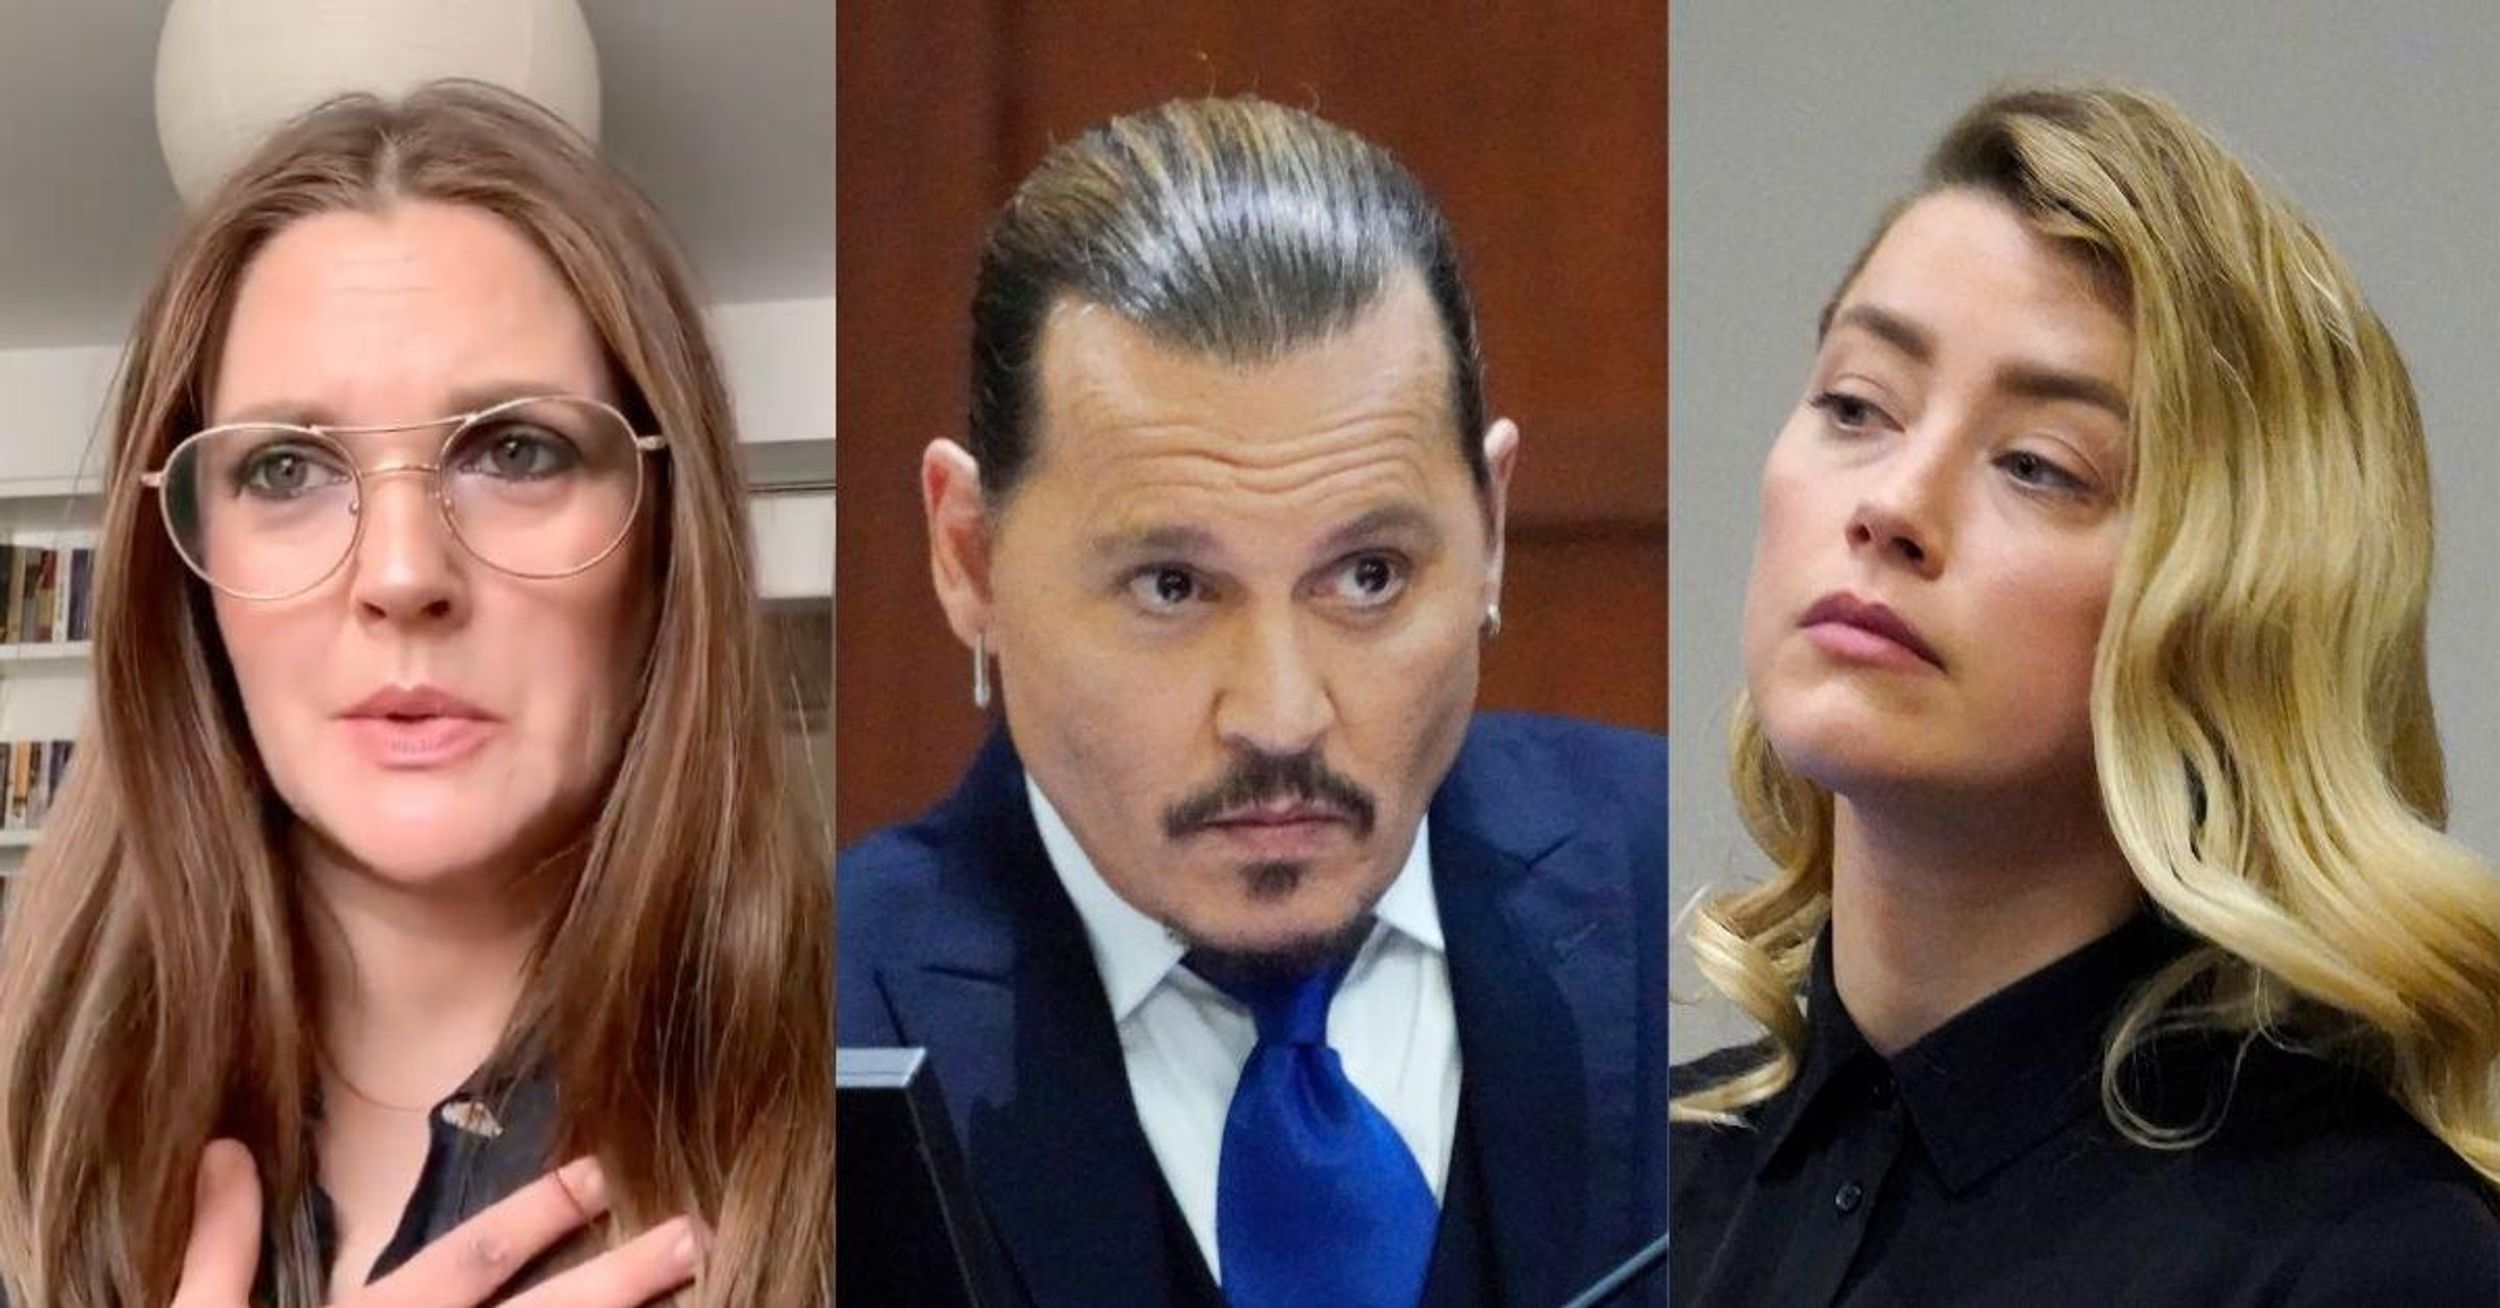 Drew Barrymore 'Deeply' Apologizes For 'Making Light' Of The Johnny Depp-Amber Heard Trial After Fan Backlash